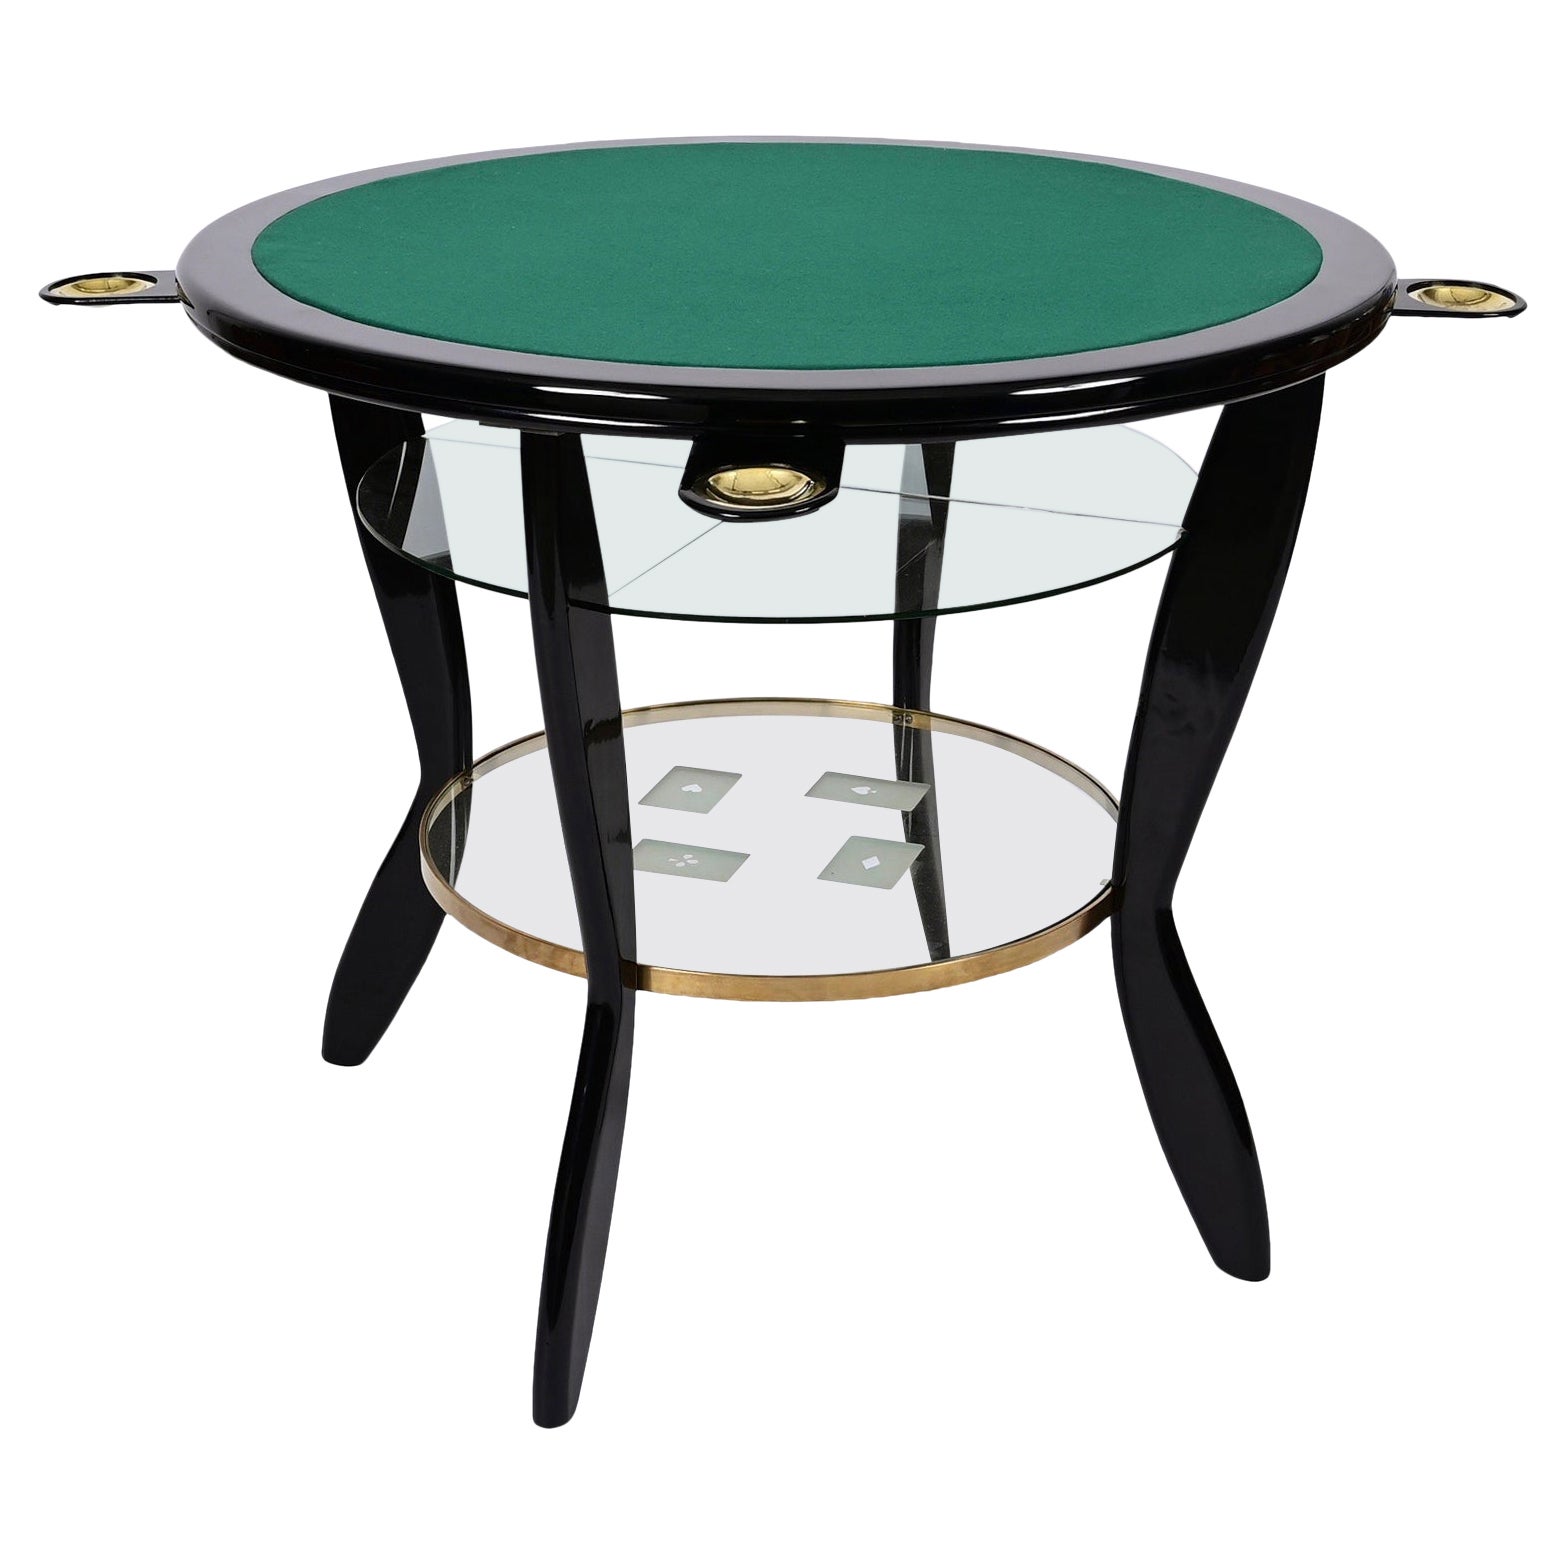 Gio Ponti Style Ebonized Beech and Brass Italian Game Table with Glass, 1950s For Sale